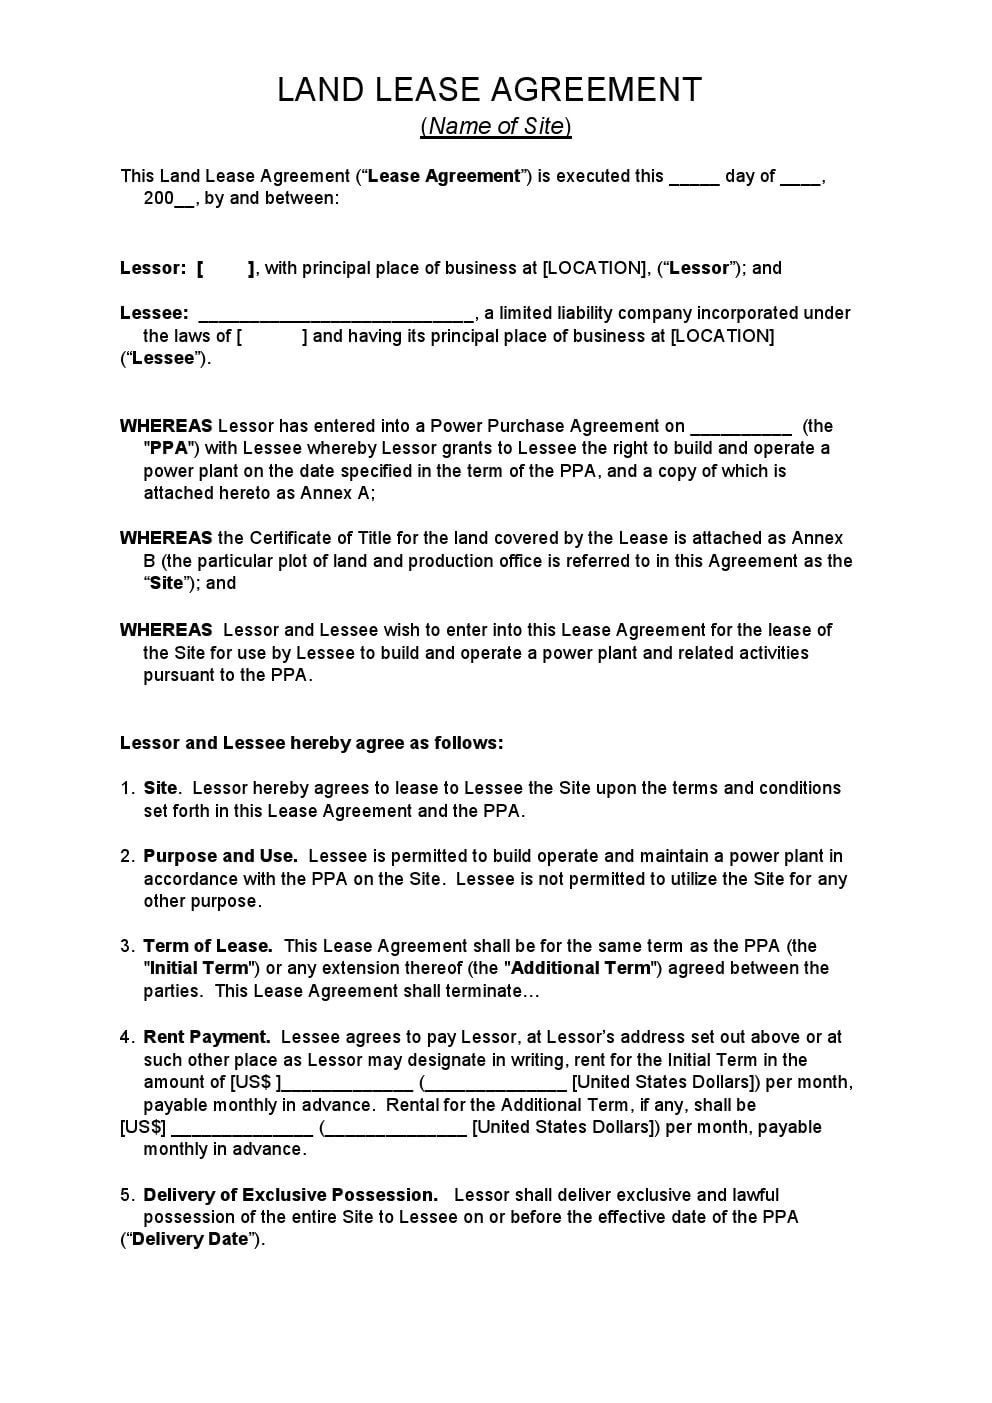 download-free-land-lease-agreement-printable-lease-agreement-21